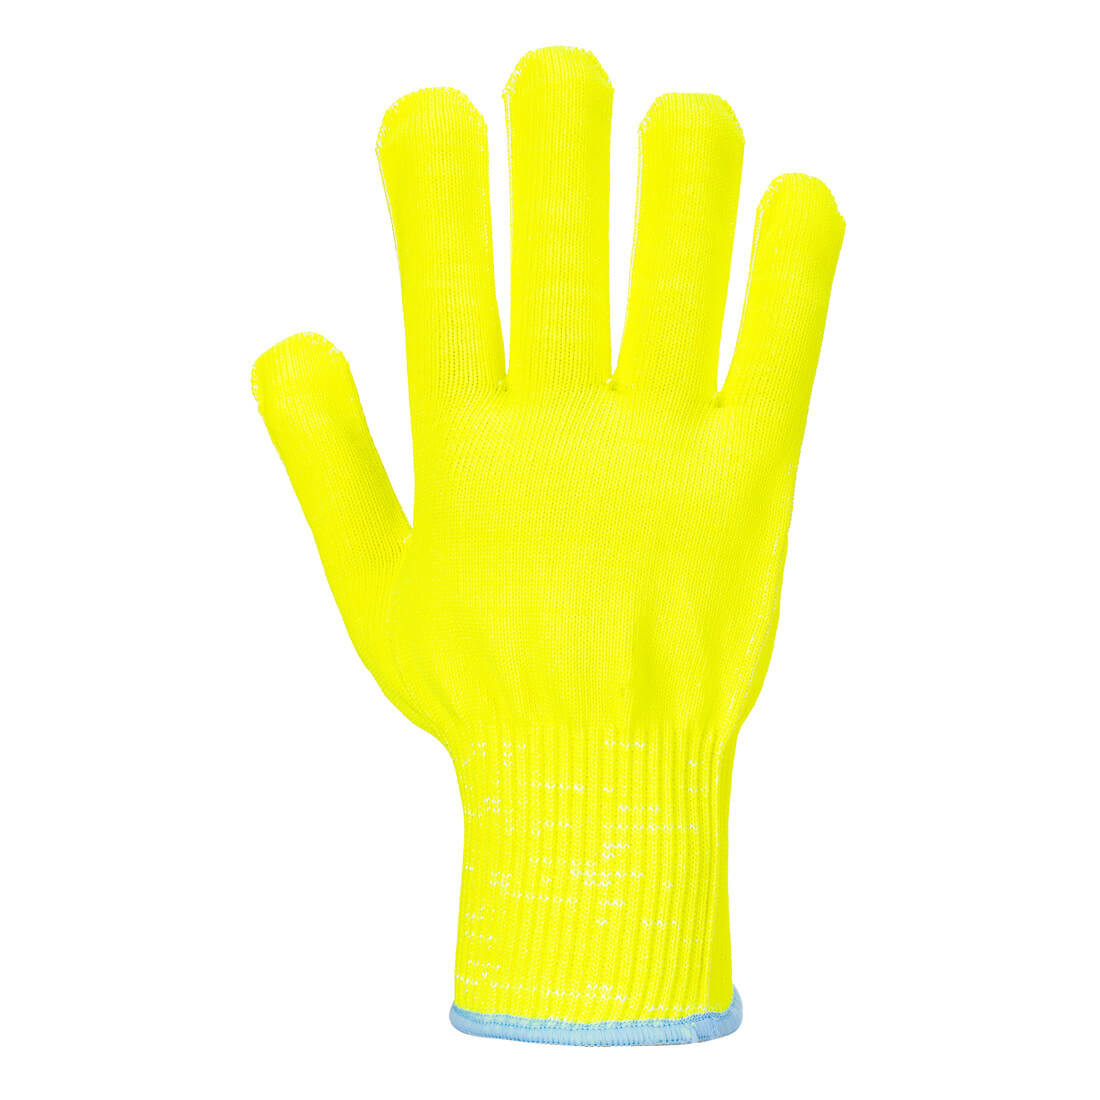 Pro Cut Liner Glove - Personal protection